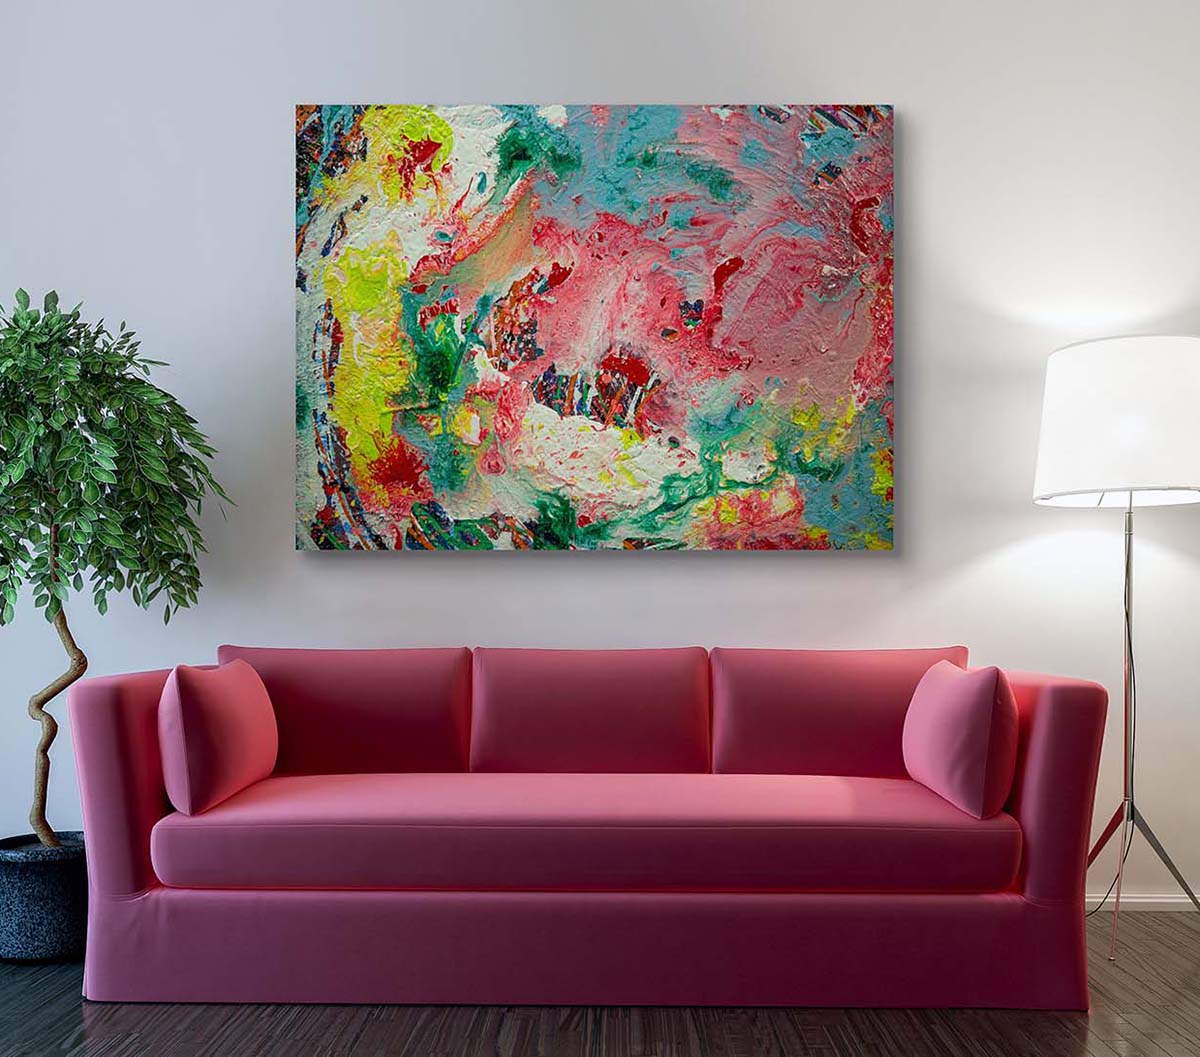 Abstract 21 Summerfeld artwork by Doug LaRue large print over a rose couch